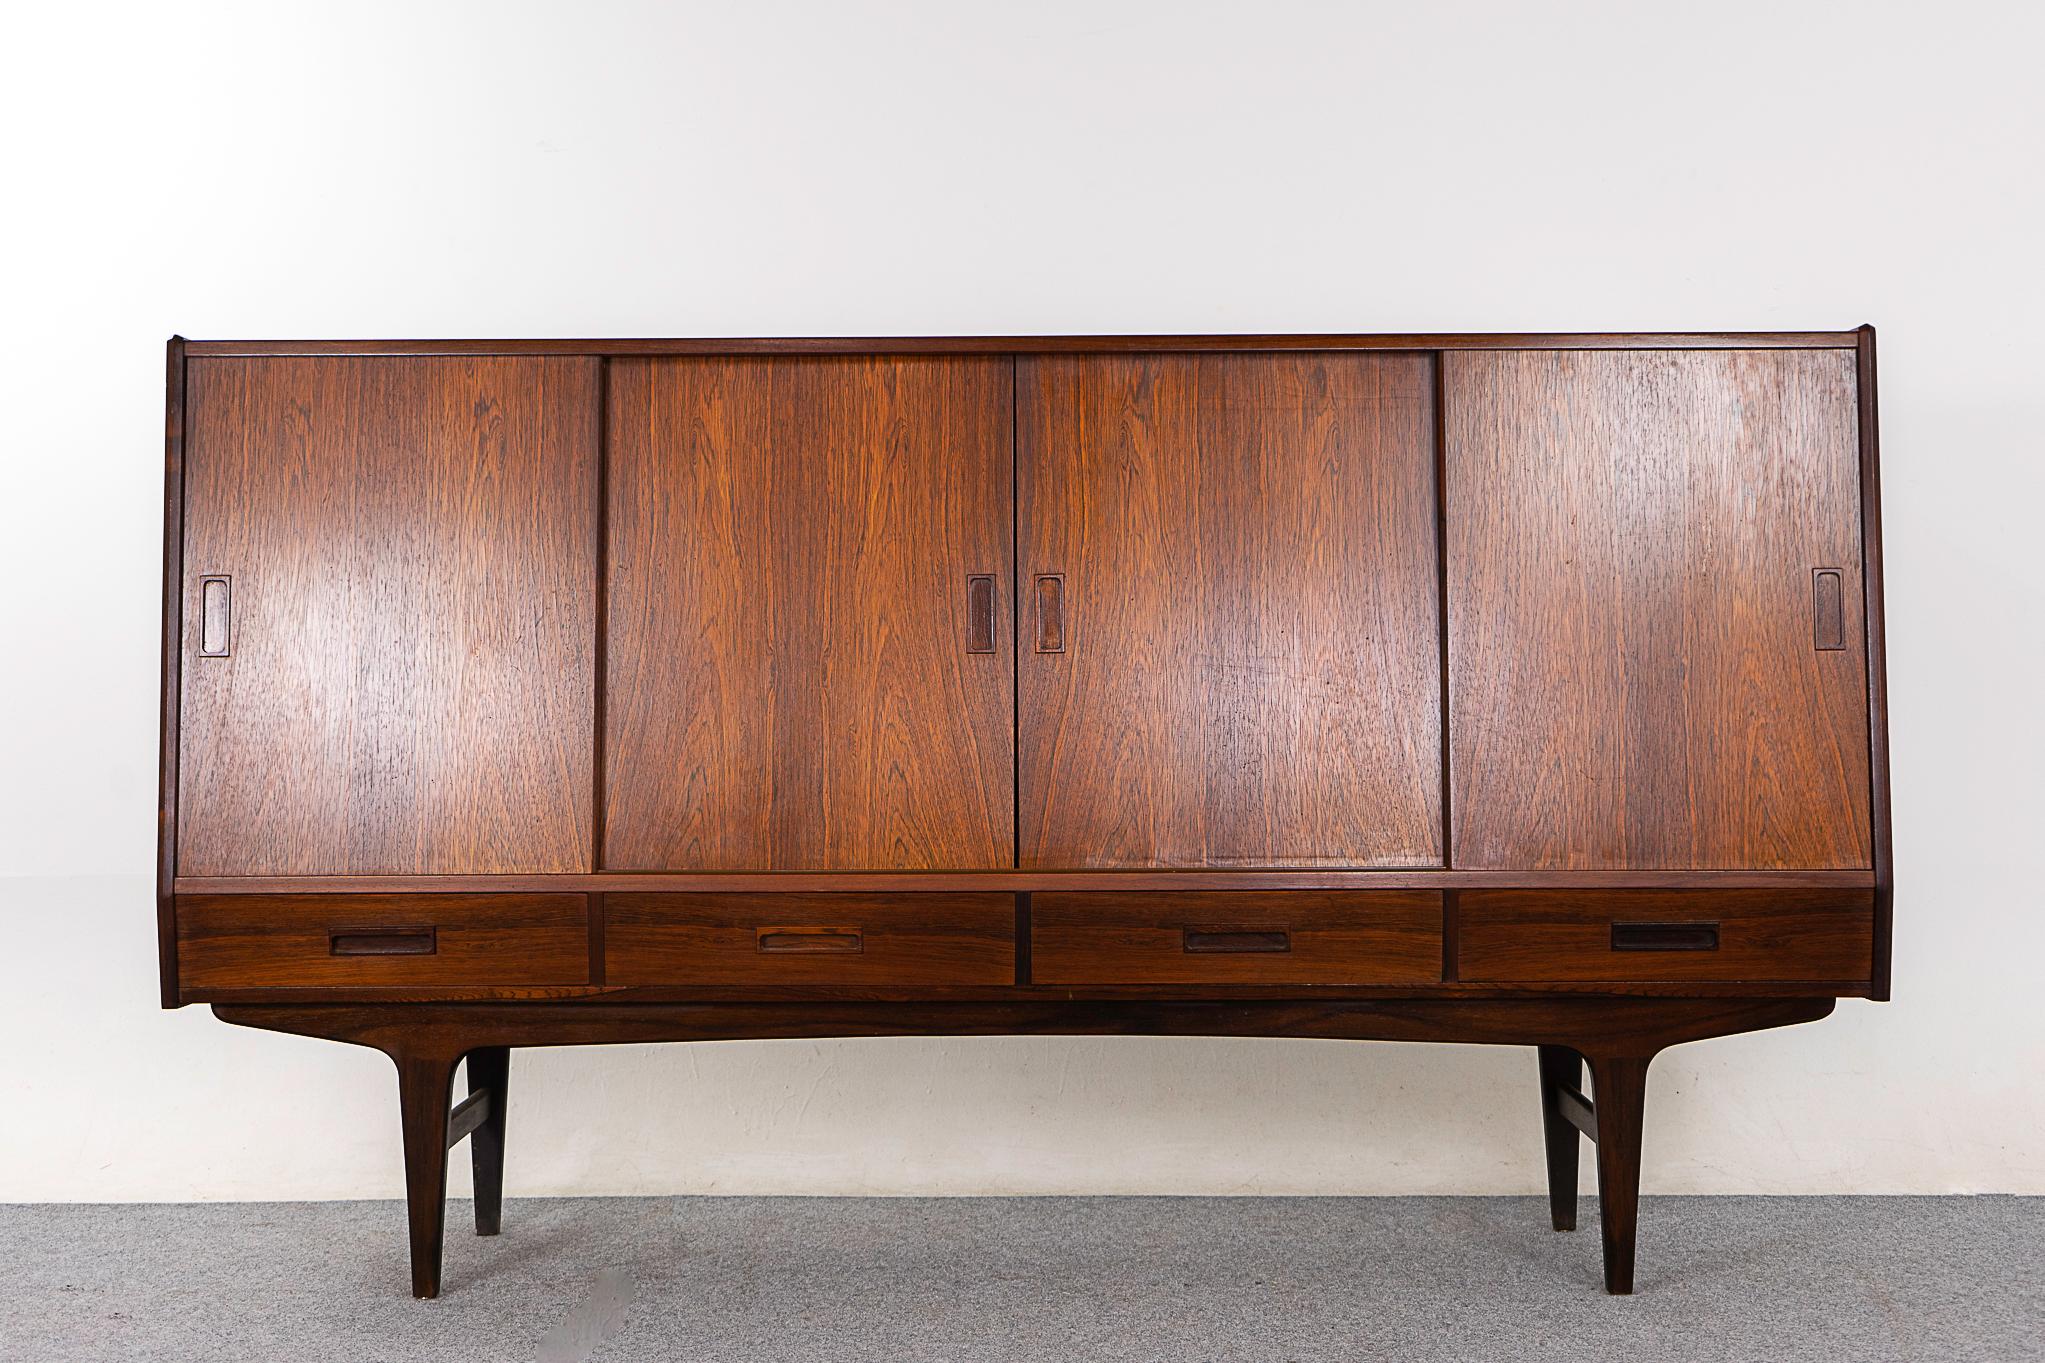 Rosewood mid-century sideboard, circa 1960's. Stunning veneered top and door faces. Unique angled front profile and interior bays with adjustable shelving, an etched mirrored bar and sleek felt lined drawers. Sculptural base with robust cross bars,